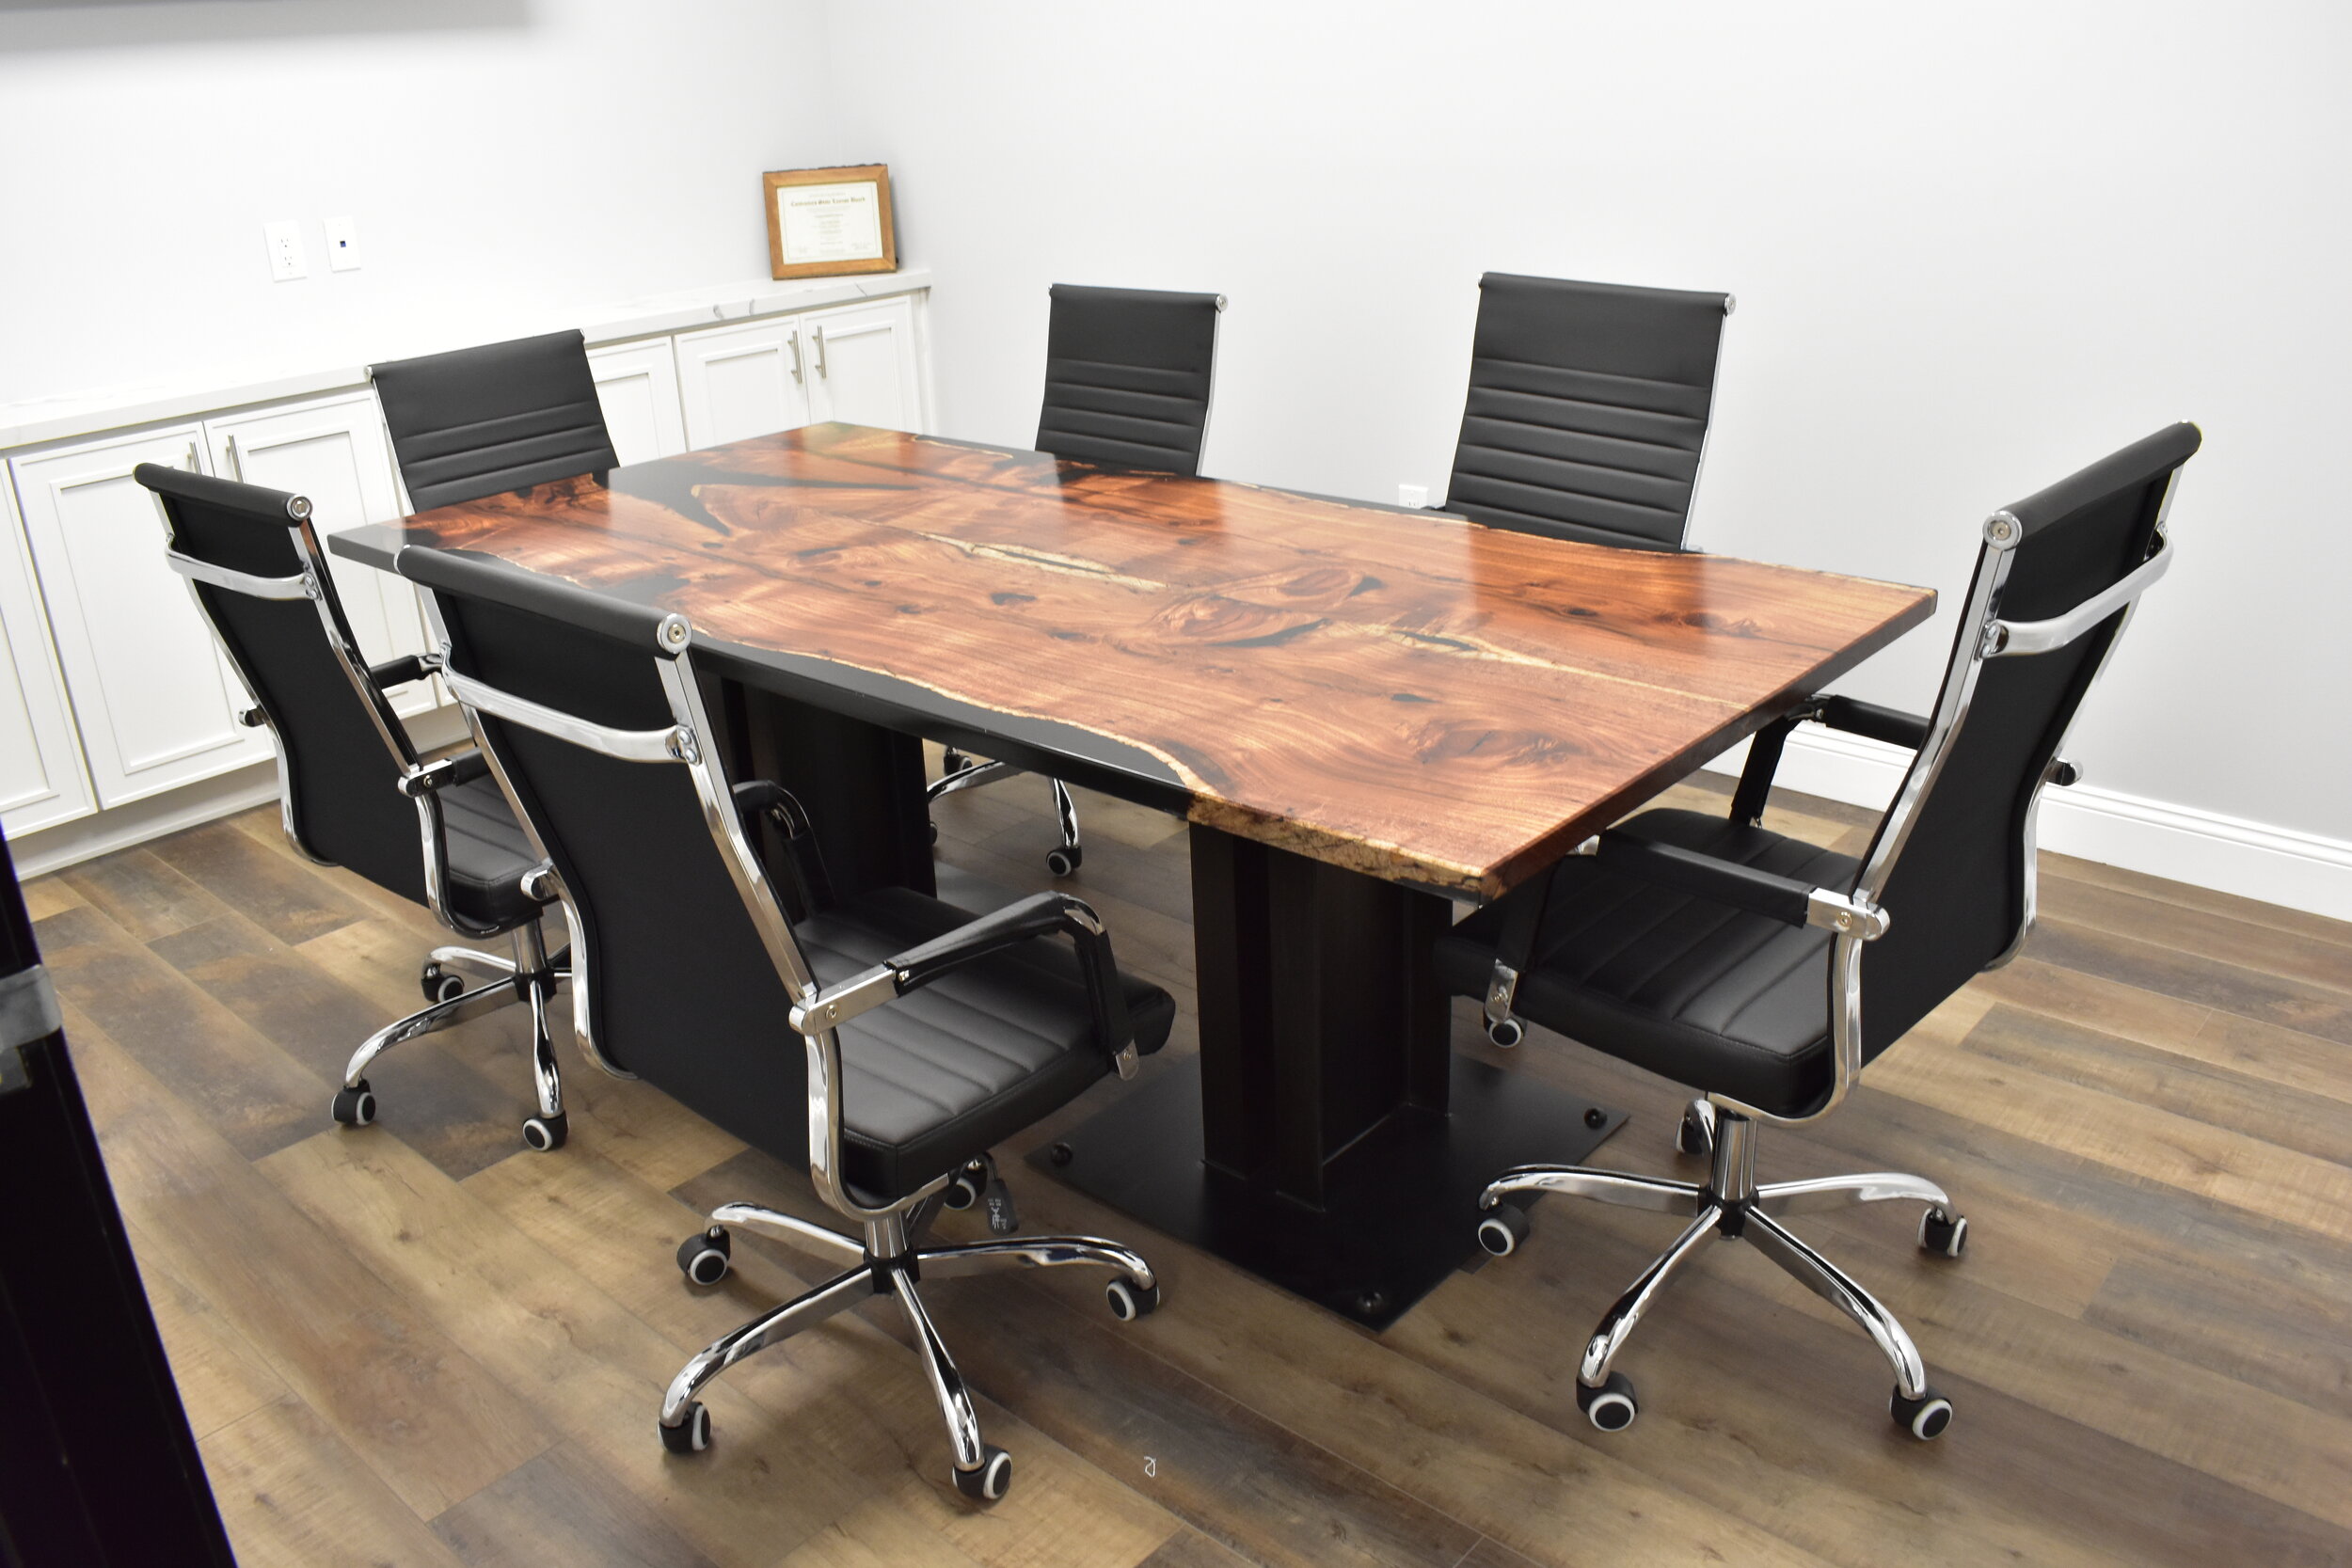  Conference Table- Book matched Wood top with Industrial steel base (black patina finish) 